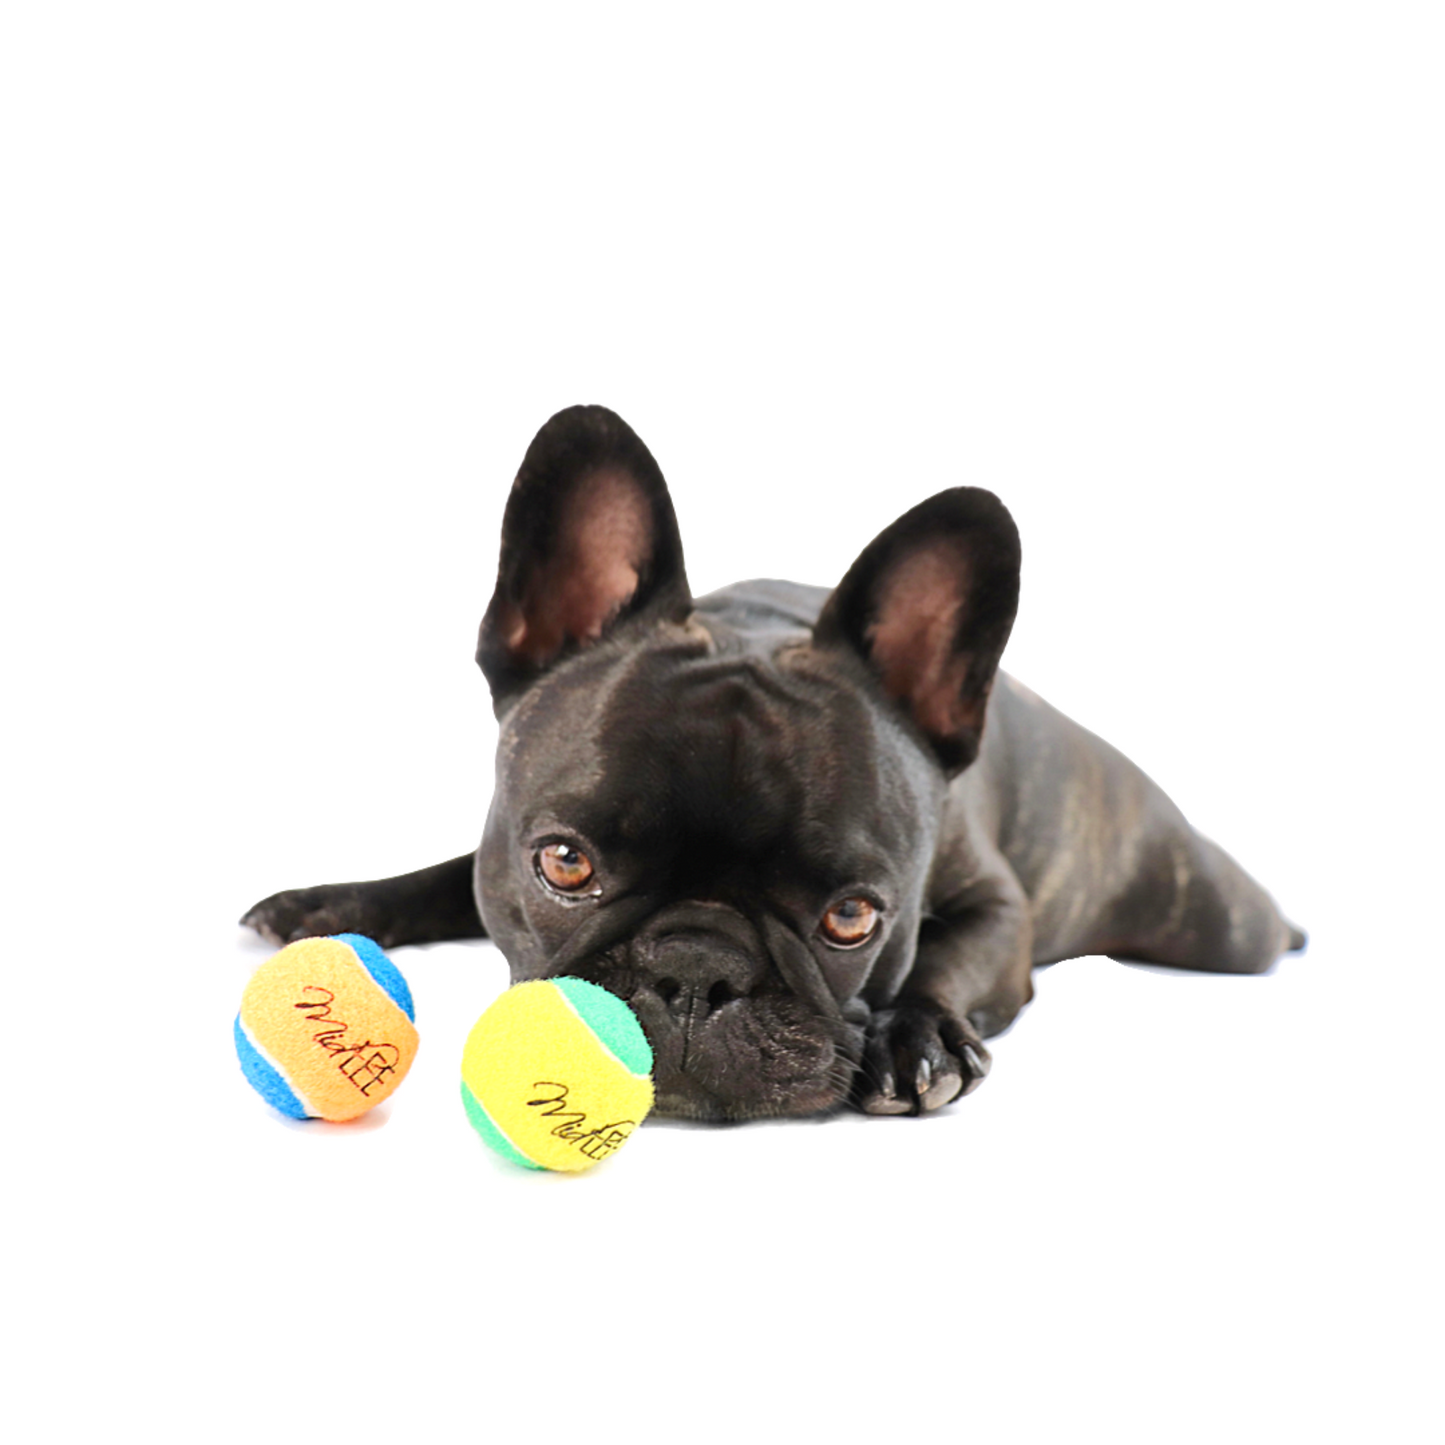 Midlee X-Small Dog Tennis Balls 1.5" Pack of 12 (Assorted, 1.5 inch)